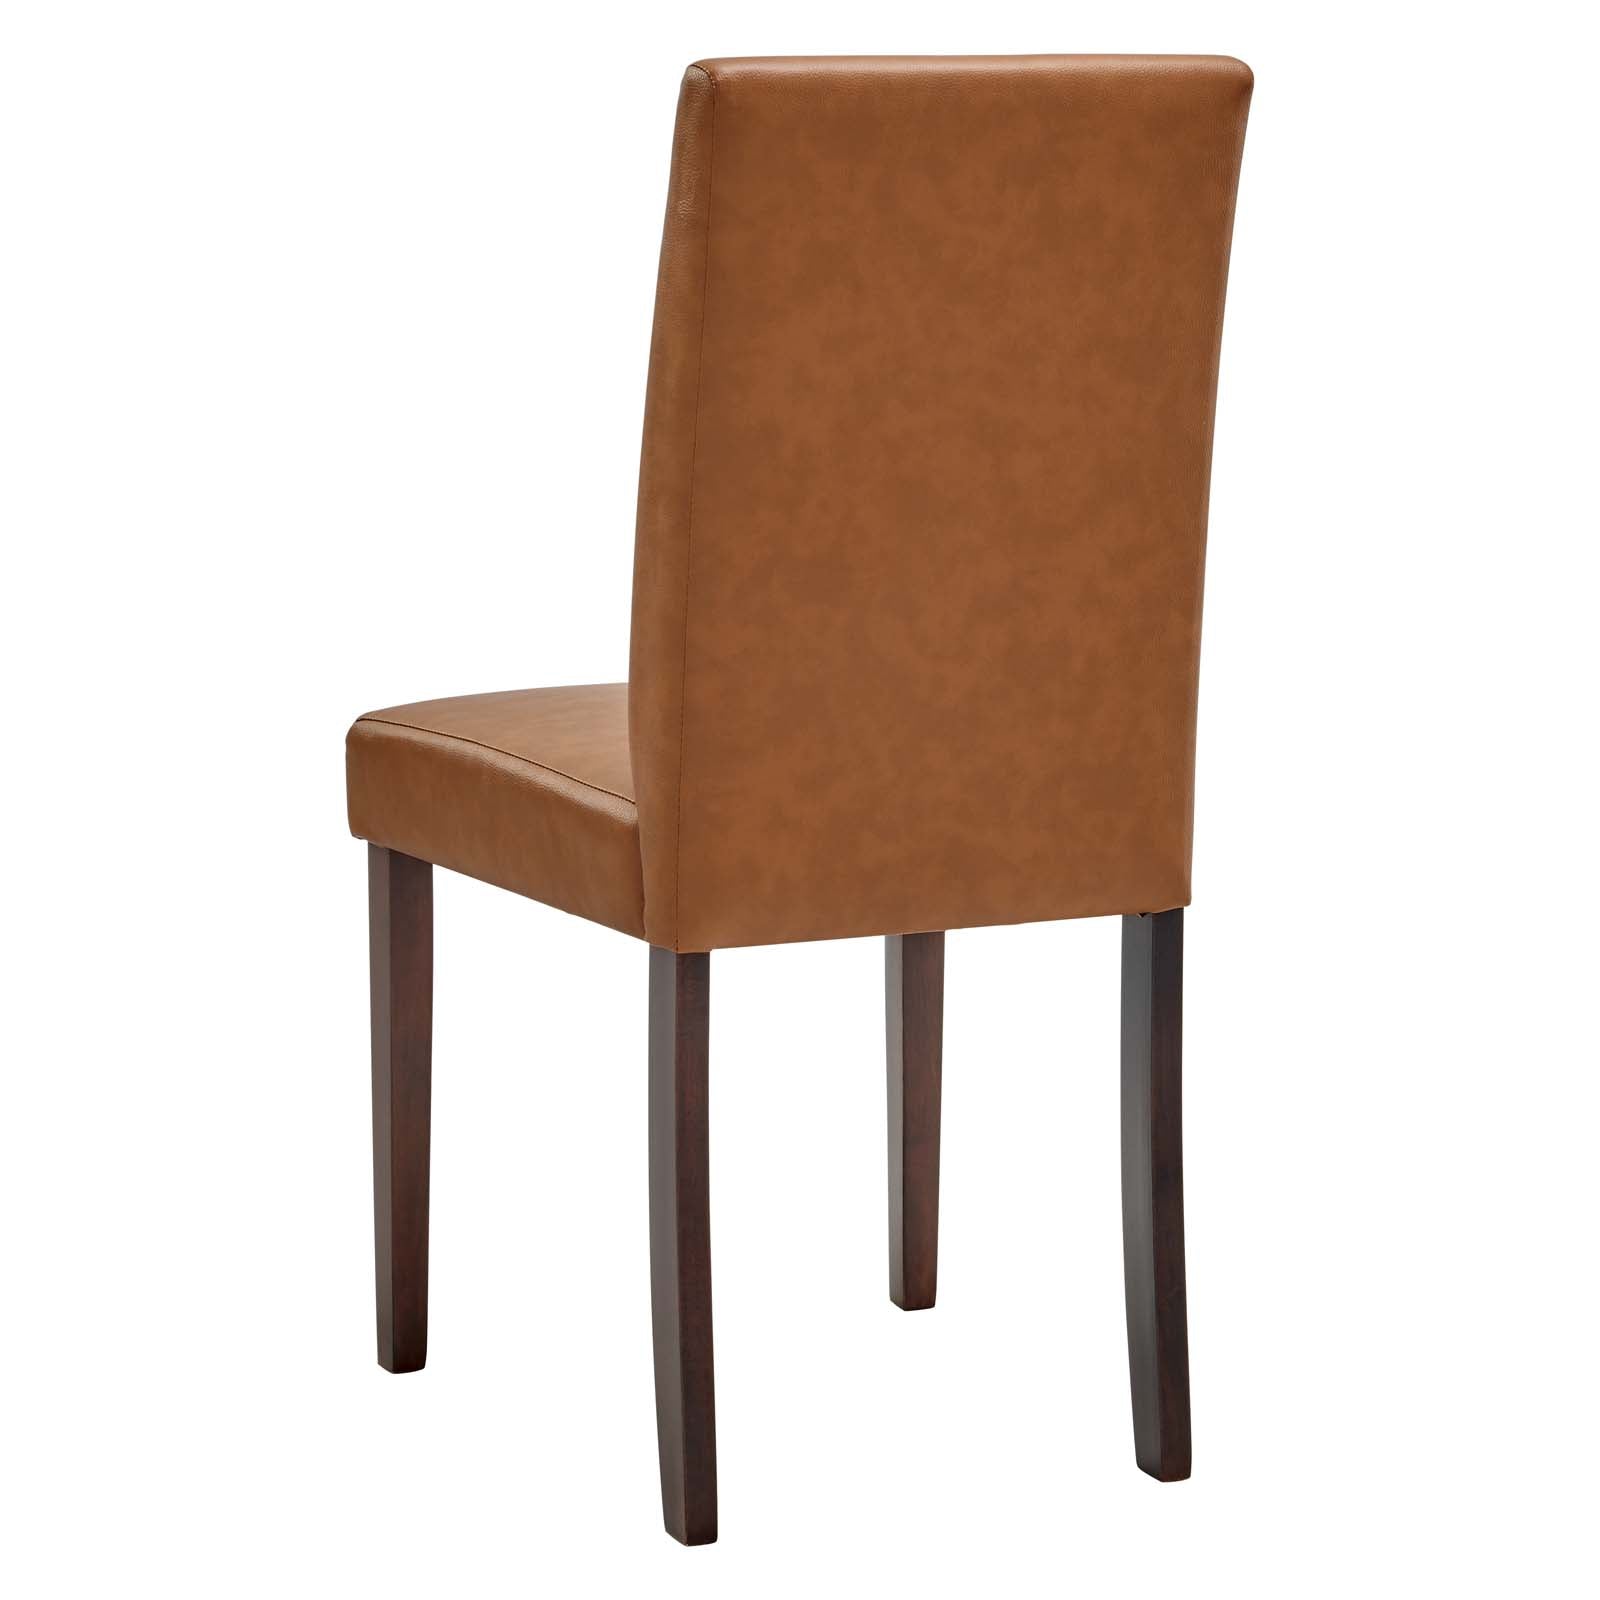 Prosper Faux Leather Dining Side Chair Set of 2 - East Shore Modern Home Furnishings